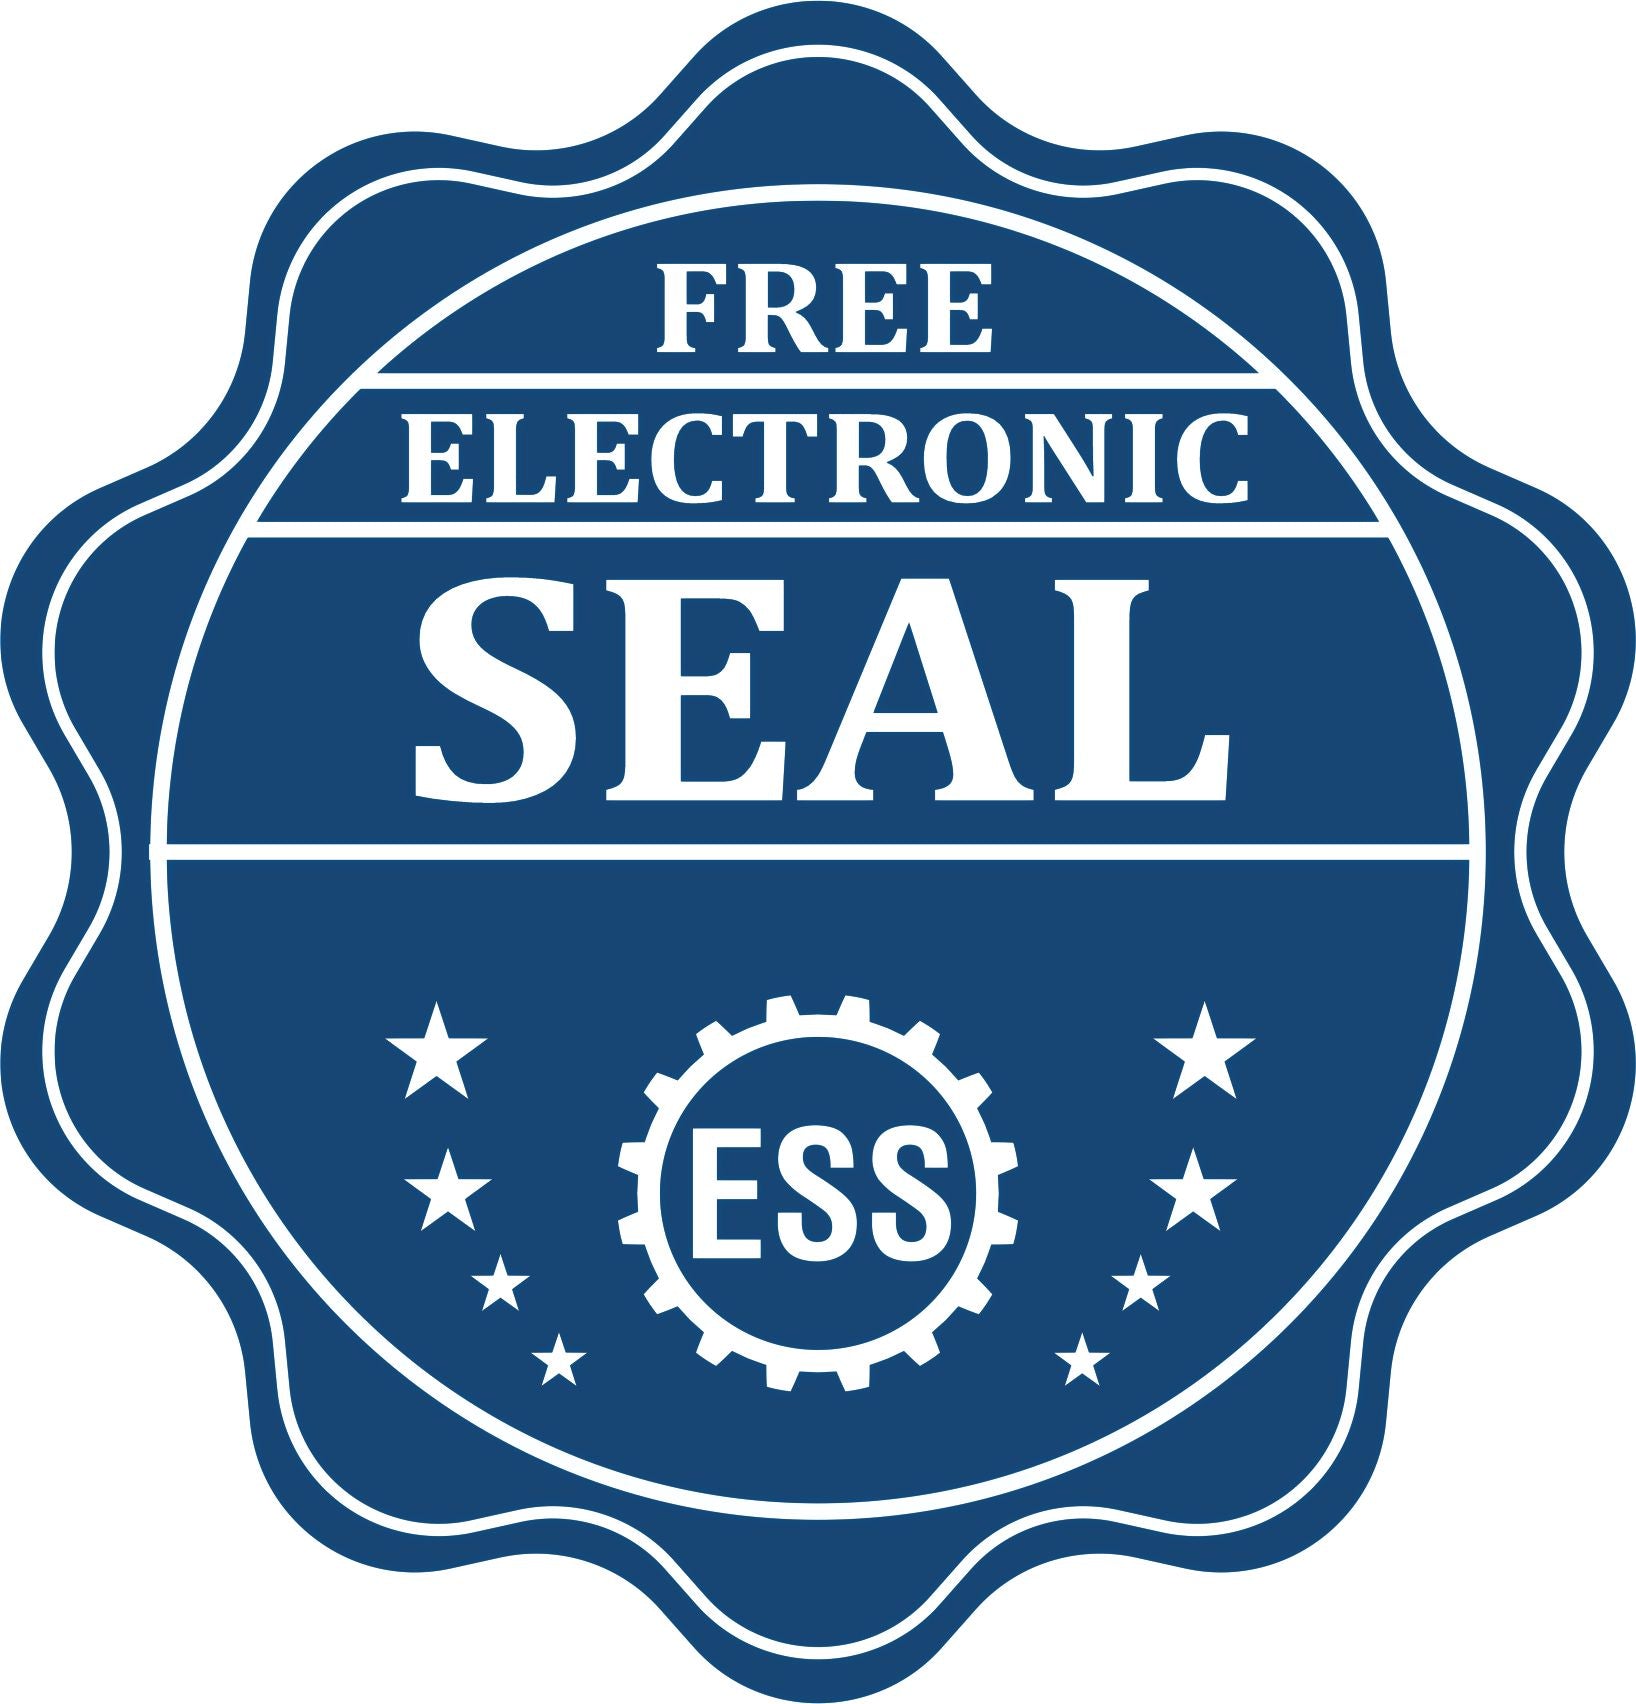 A badge showing a free electronic seal for the Gift North Dakota Land Surveyor Seal with stars and the ESS gear on the emblem.